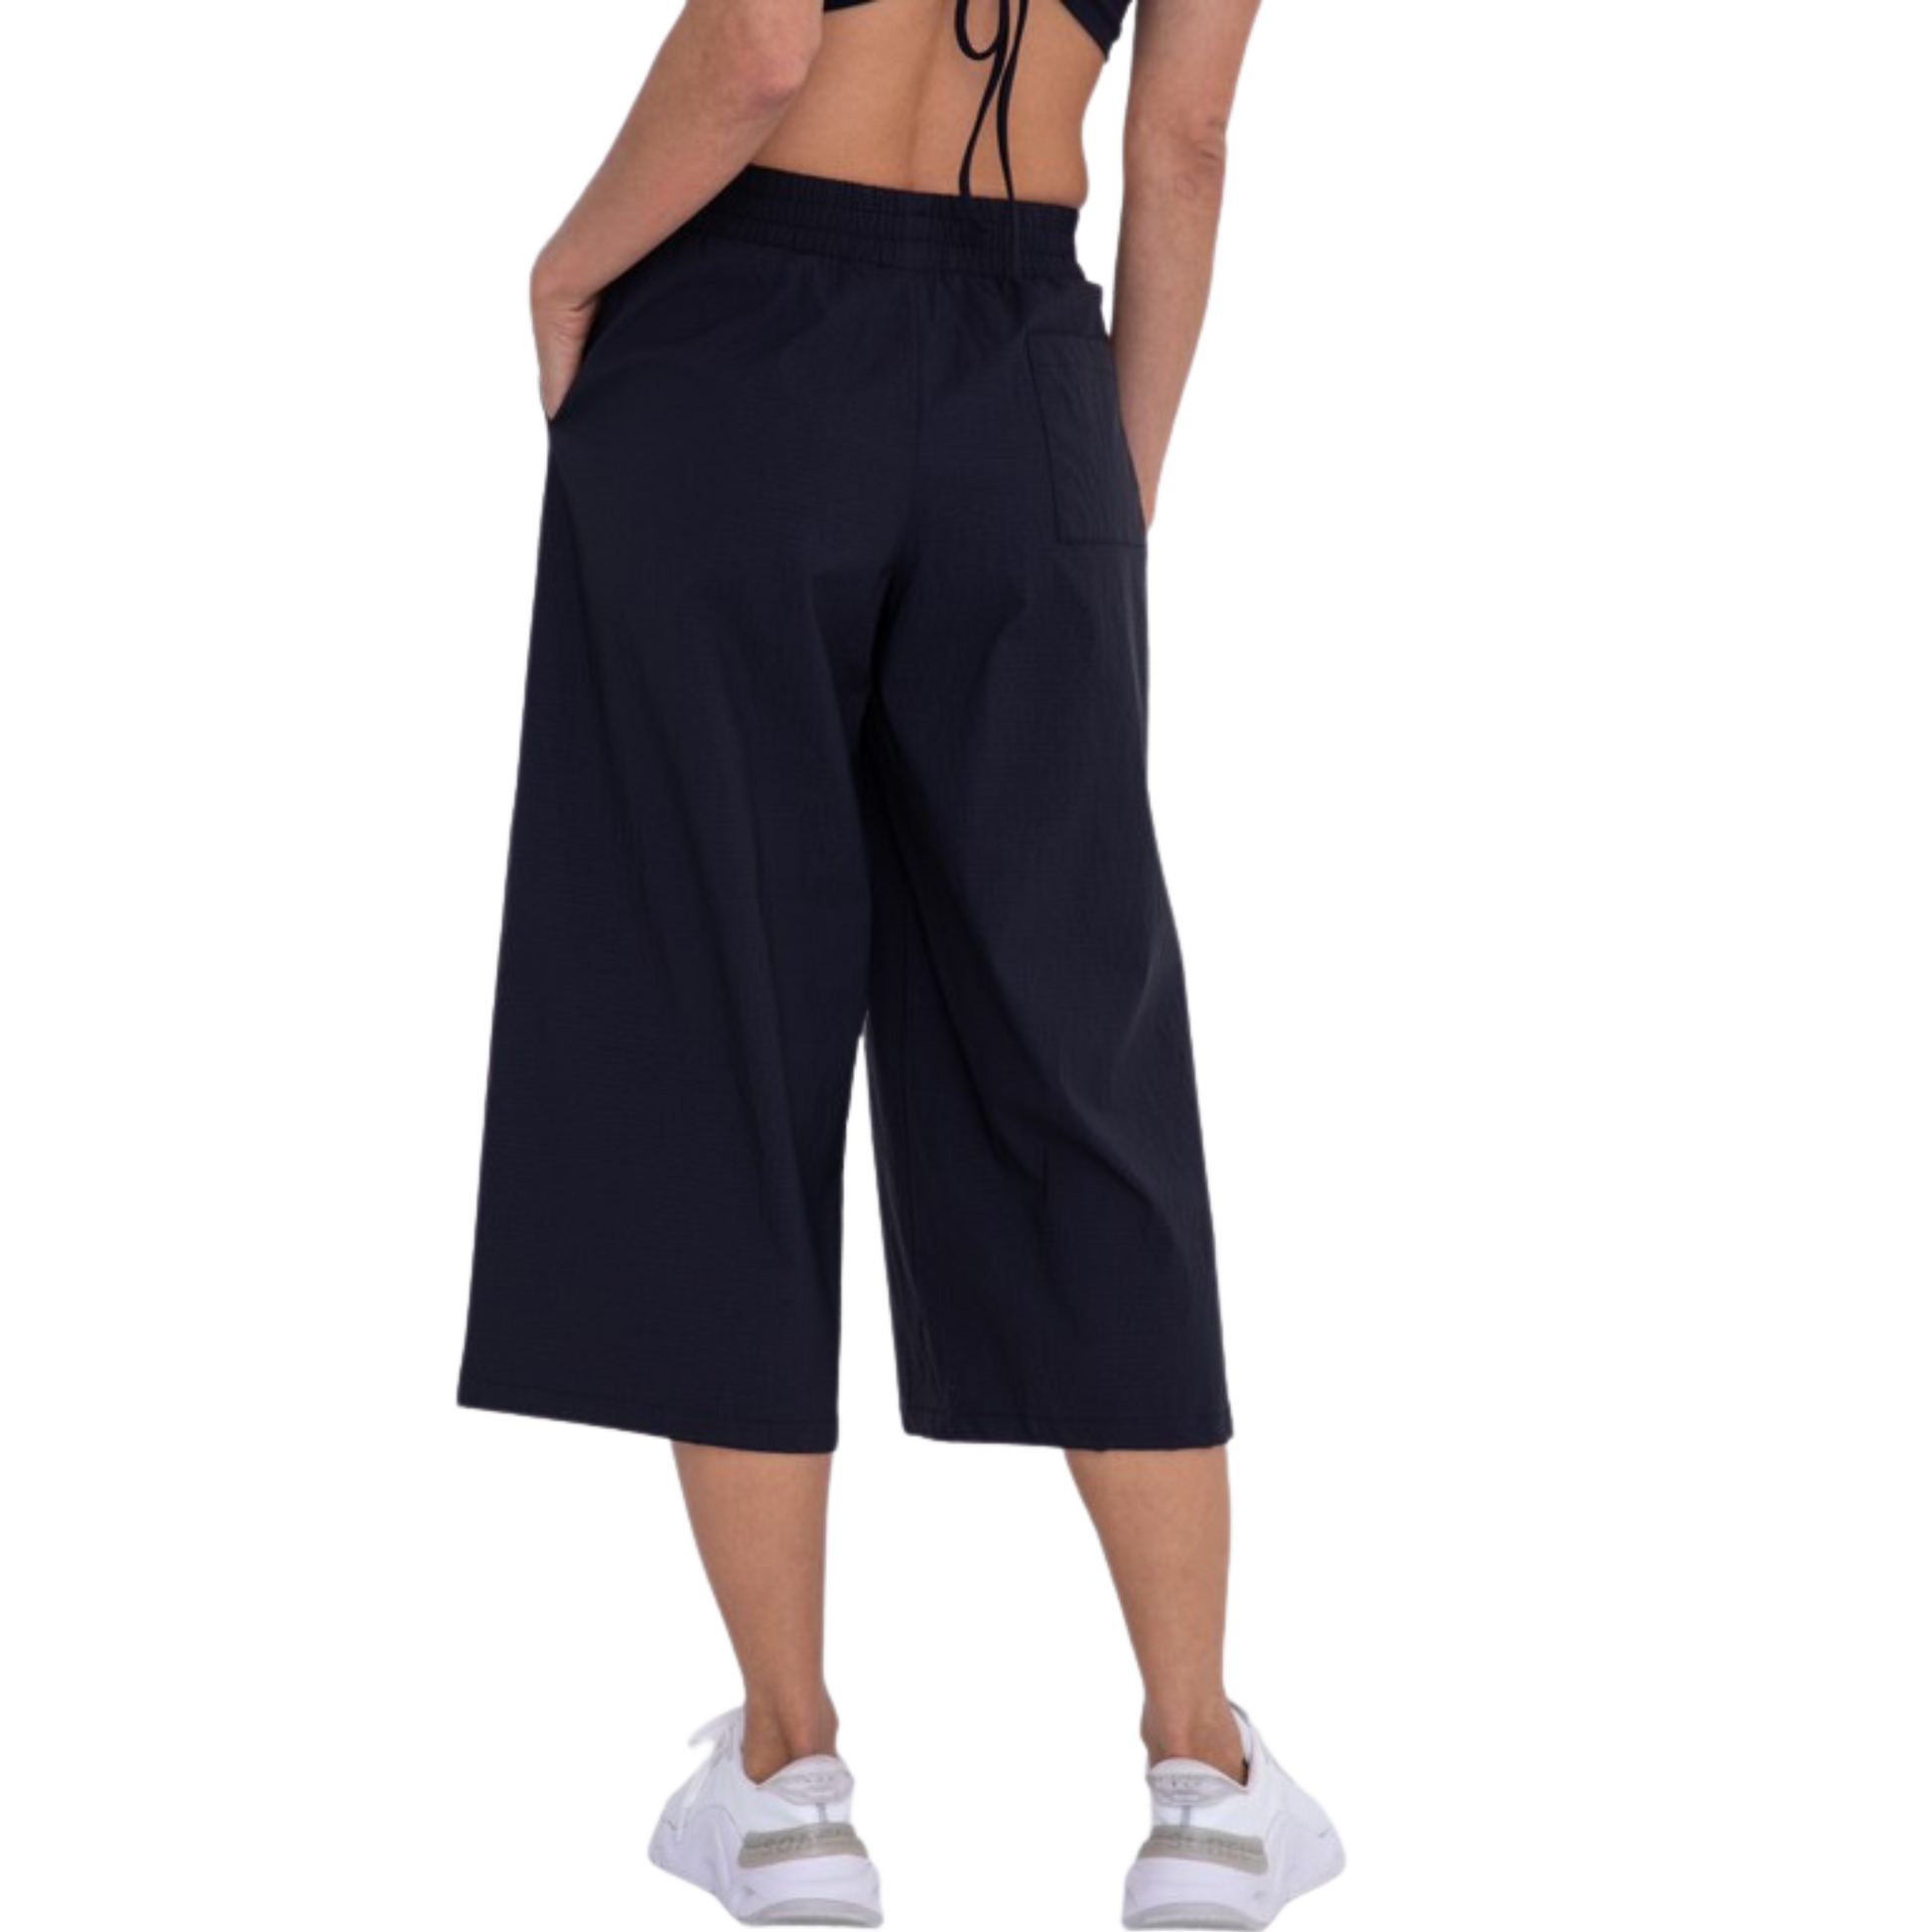 Made from a sturdy stretch rib stop fabric, these Cropped Wide Leg Pants are perfect for everyday wear. The elastic waistband provides a comfortable fit, while the faux fly stitching and slash pockets add subtle style. Plus, they're water-resistant and have a wide, cropped, flared leg for breathability. Enjoy the perfect balance of style and comfort.